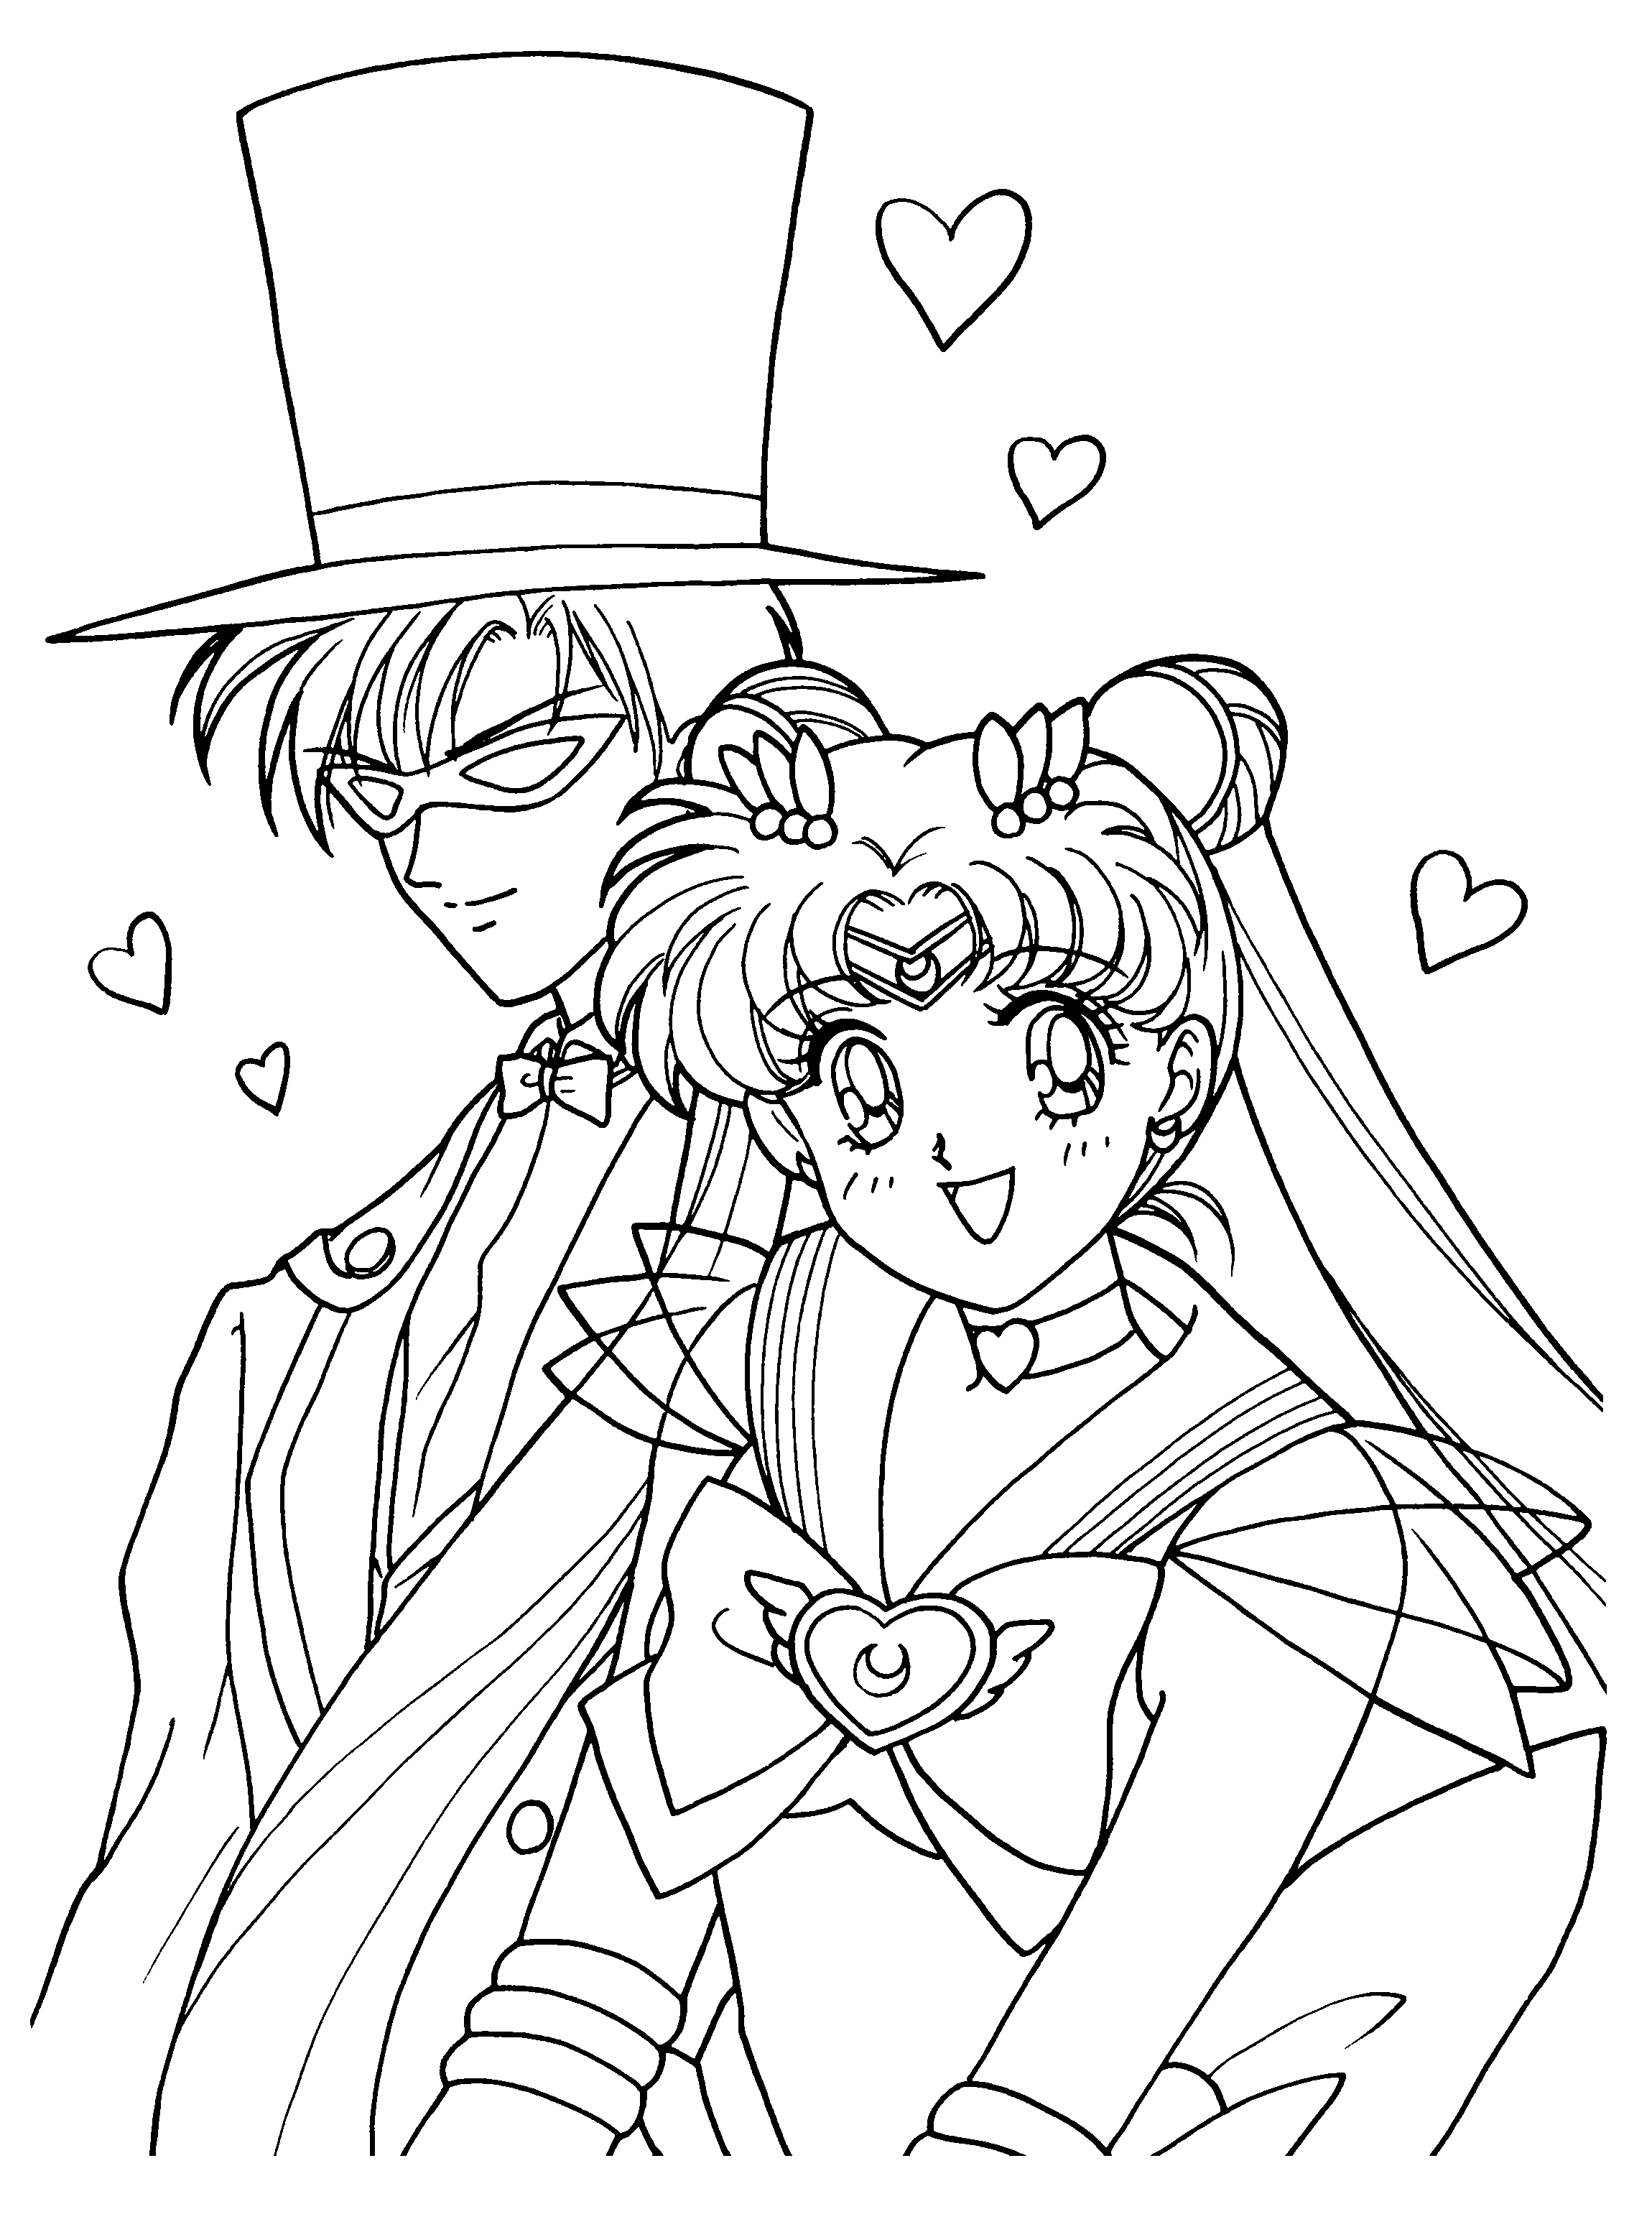 Coloring Page - Sailormoon coloring pages 13